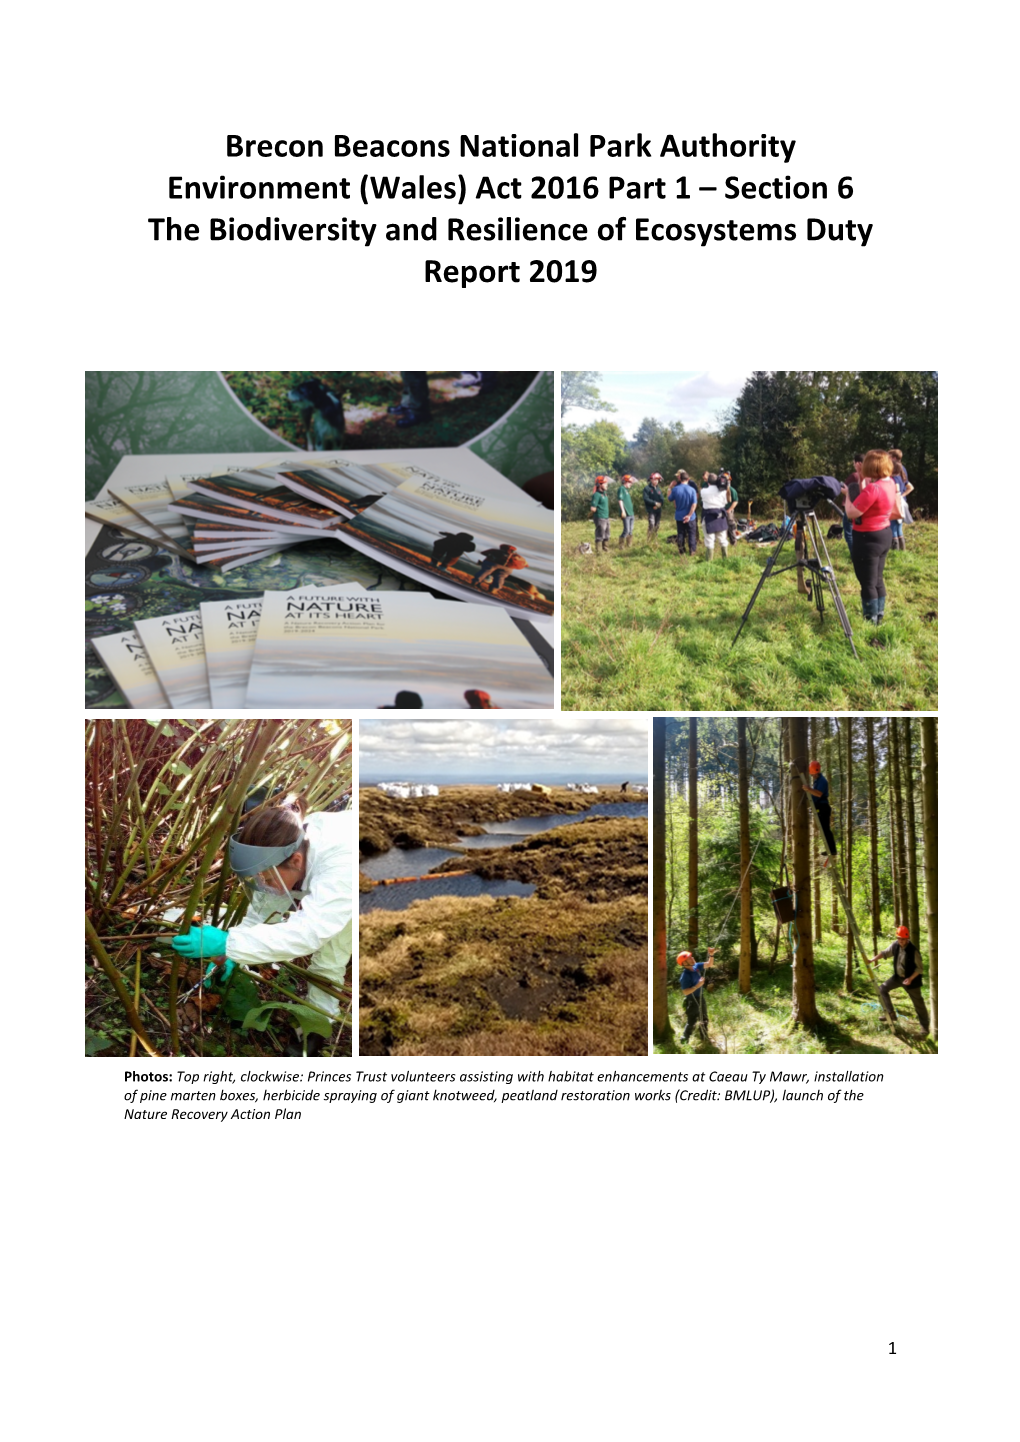 Brecon Beacons National Park Authority Environment (Wales) Act 2016 Part 1 – Section 6 the Biodiversity and Resilience of Ecosystems Duty Report 2019